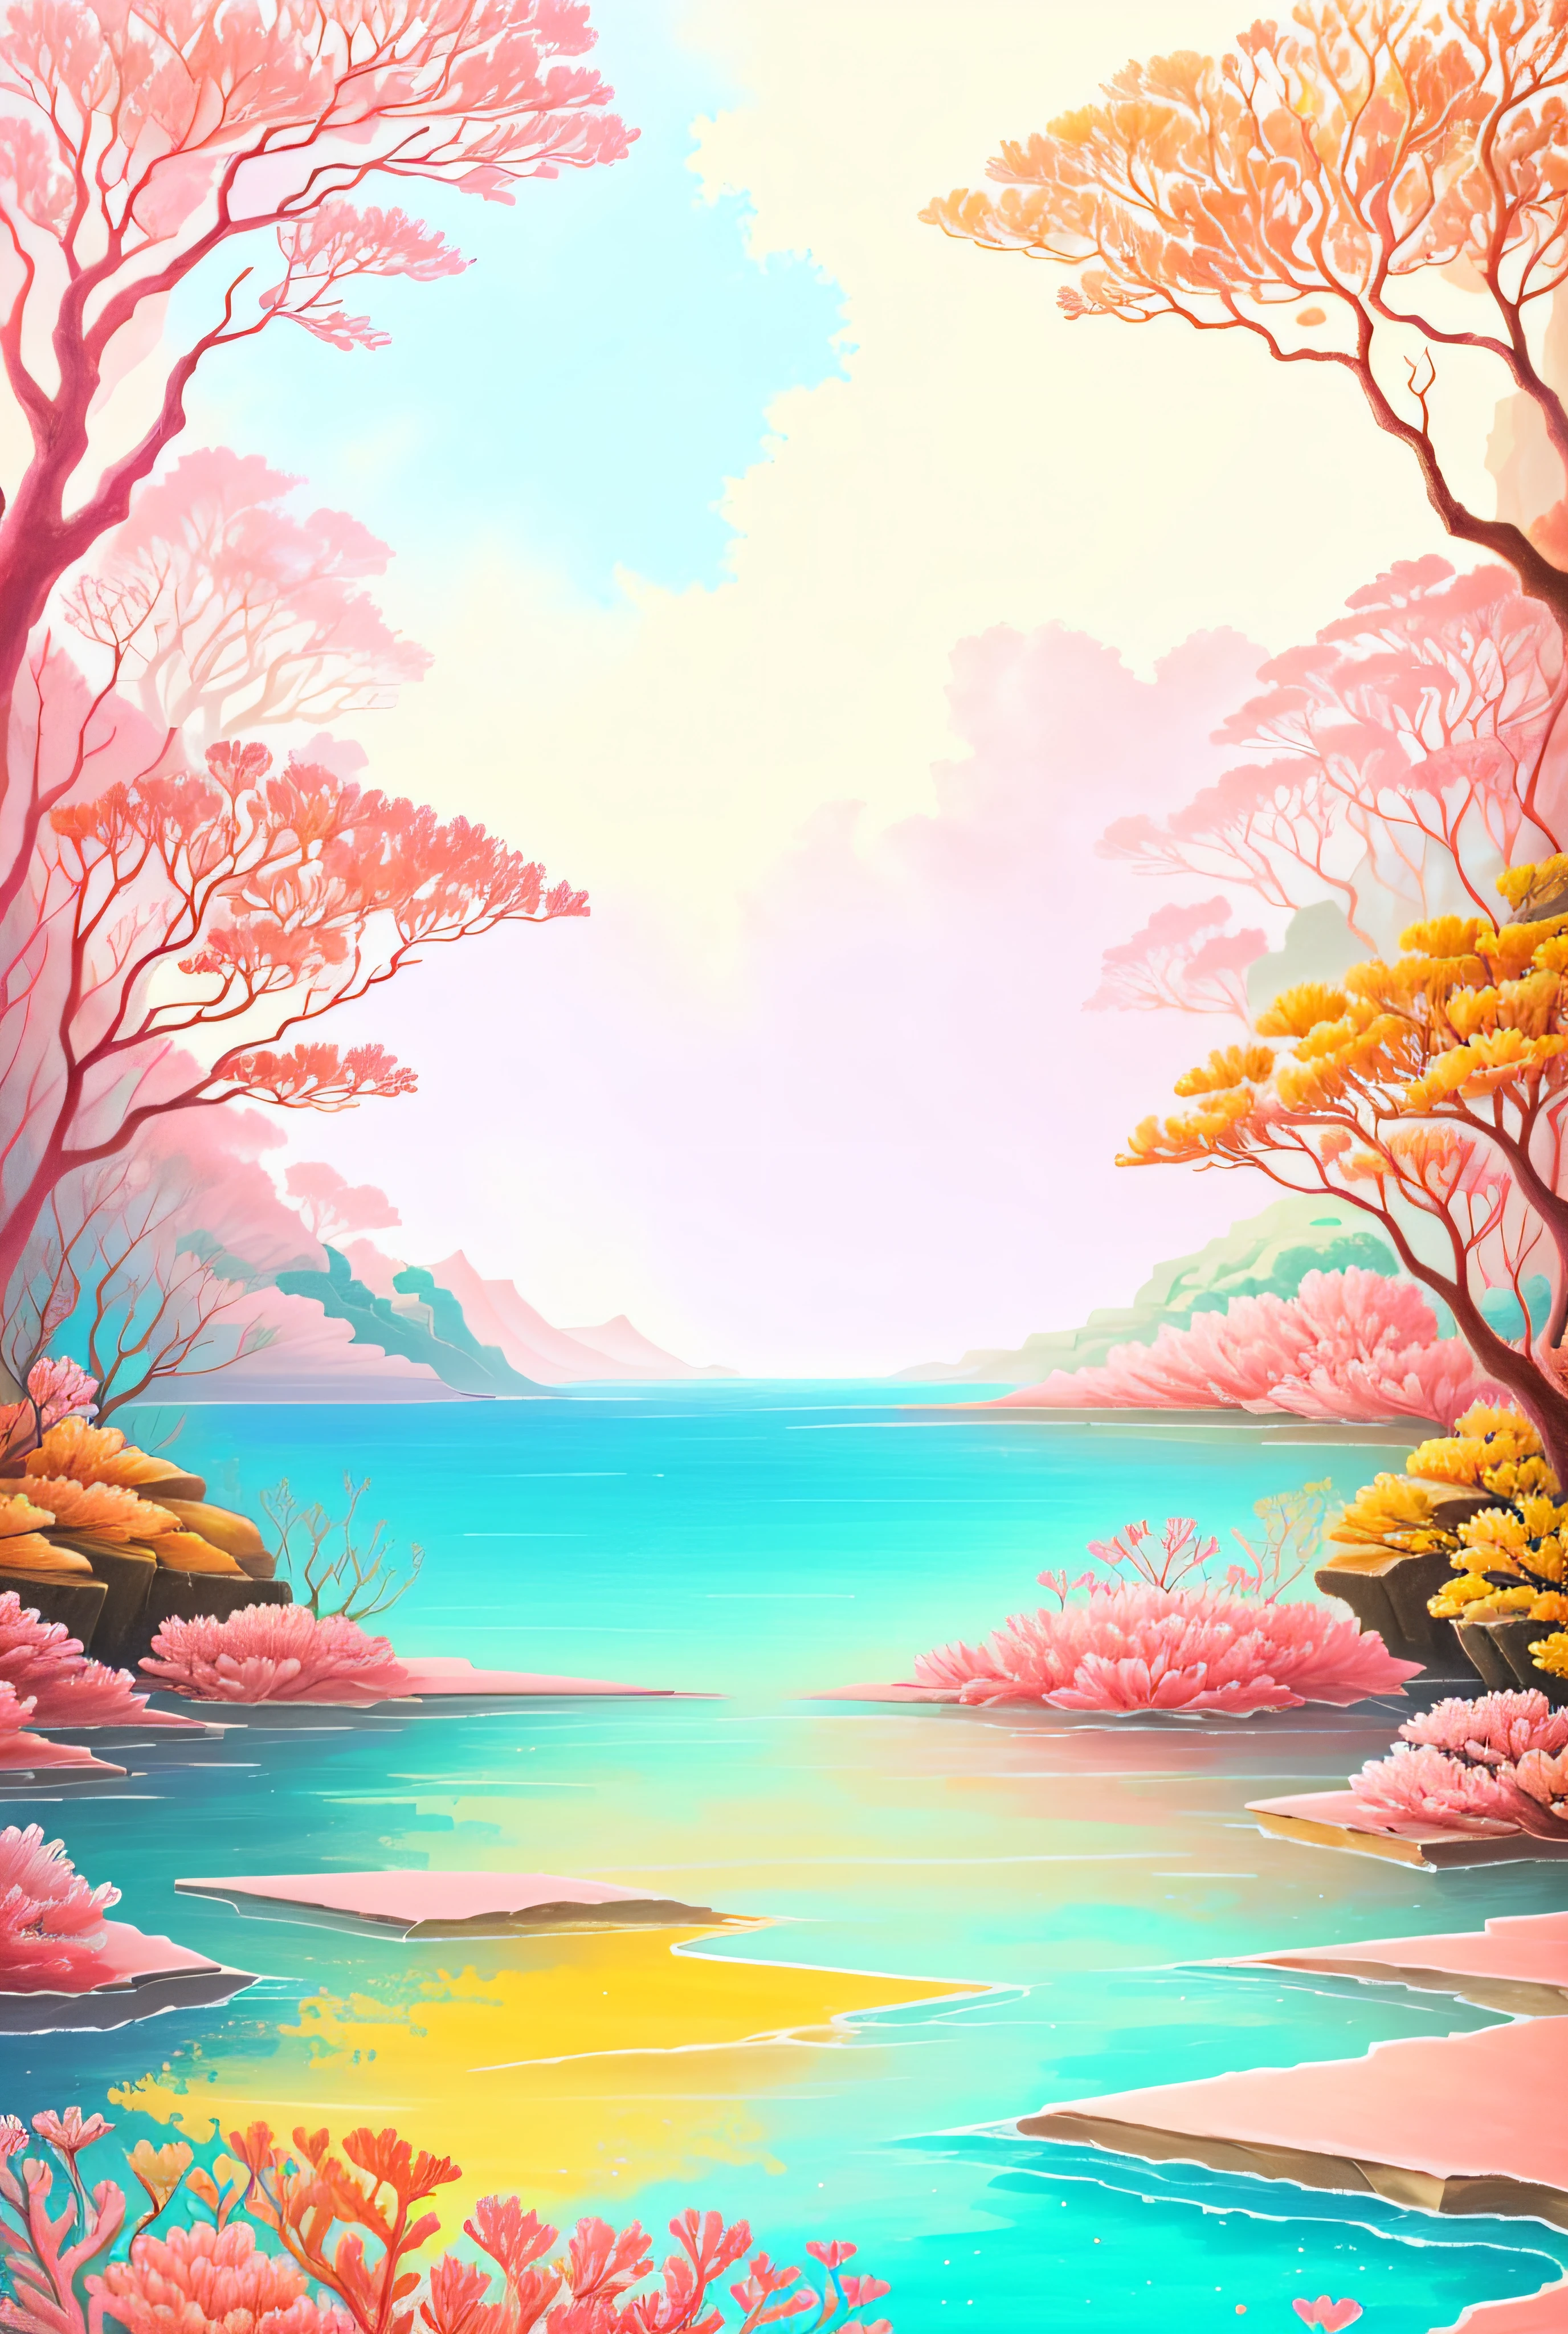 Thick strokes，without humans，Rich background，Nice looking paintings， scenecy，In pink，amarelo，Feathers as background，The corals，the reef